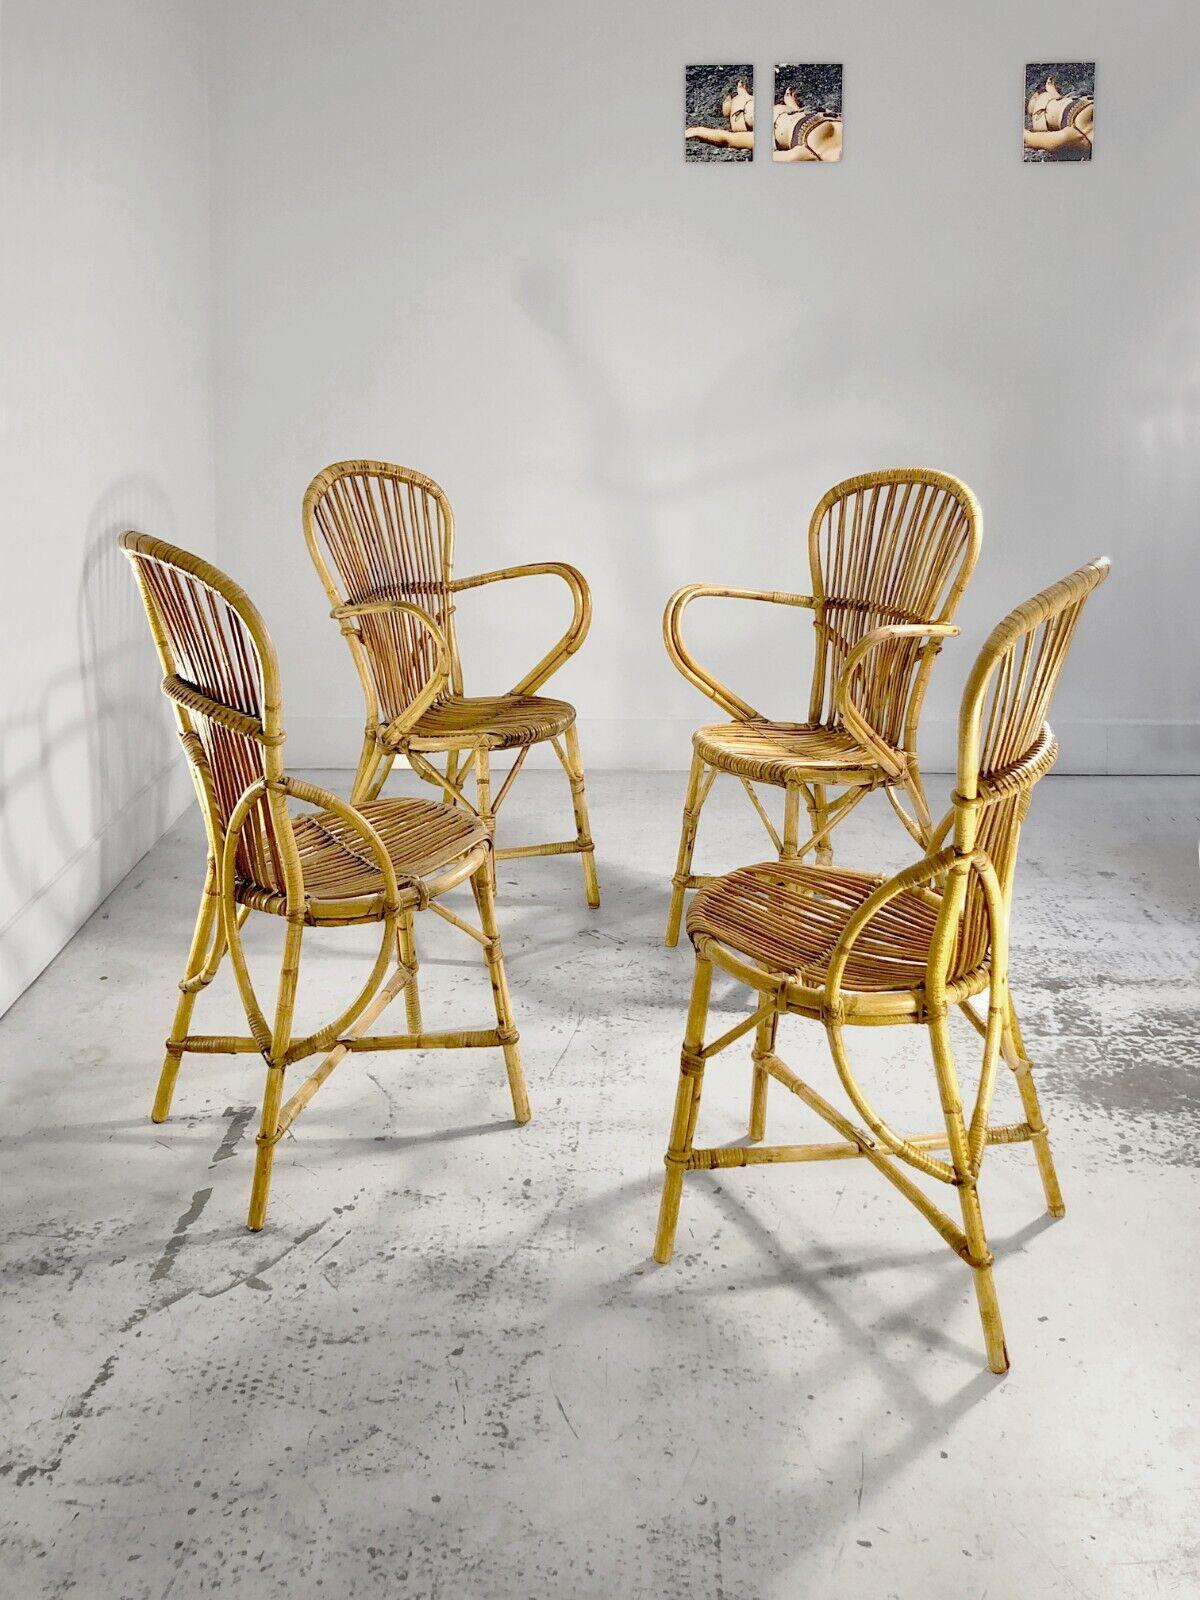 An authentic set of 4 summer chairs including 2 with large armrests, Modernist, Forme-Libre, Shabby-Chic, structures in folded and knotted bamboo, seats and back in woven wicker, by Adrien Audoux and Frida Minnet, each stamped Audoux-Minnet, Golfe